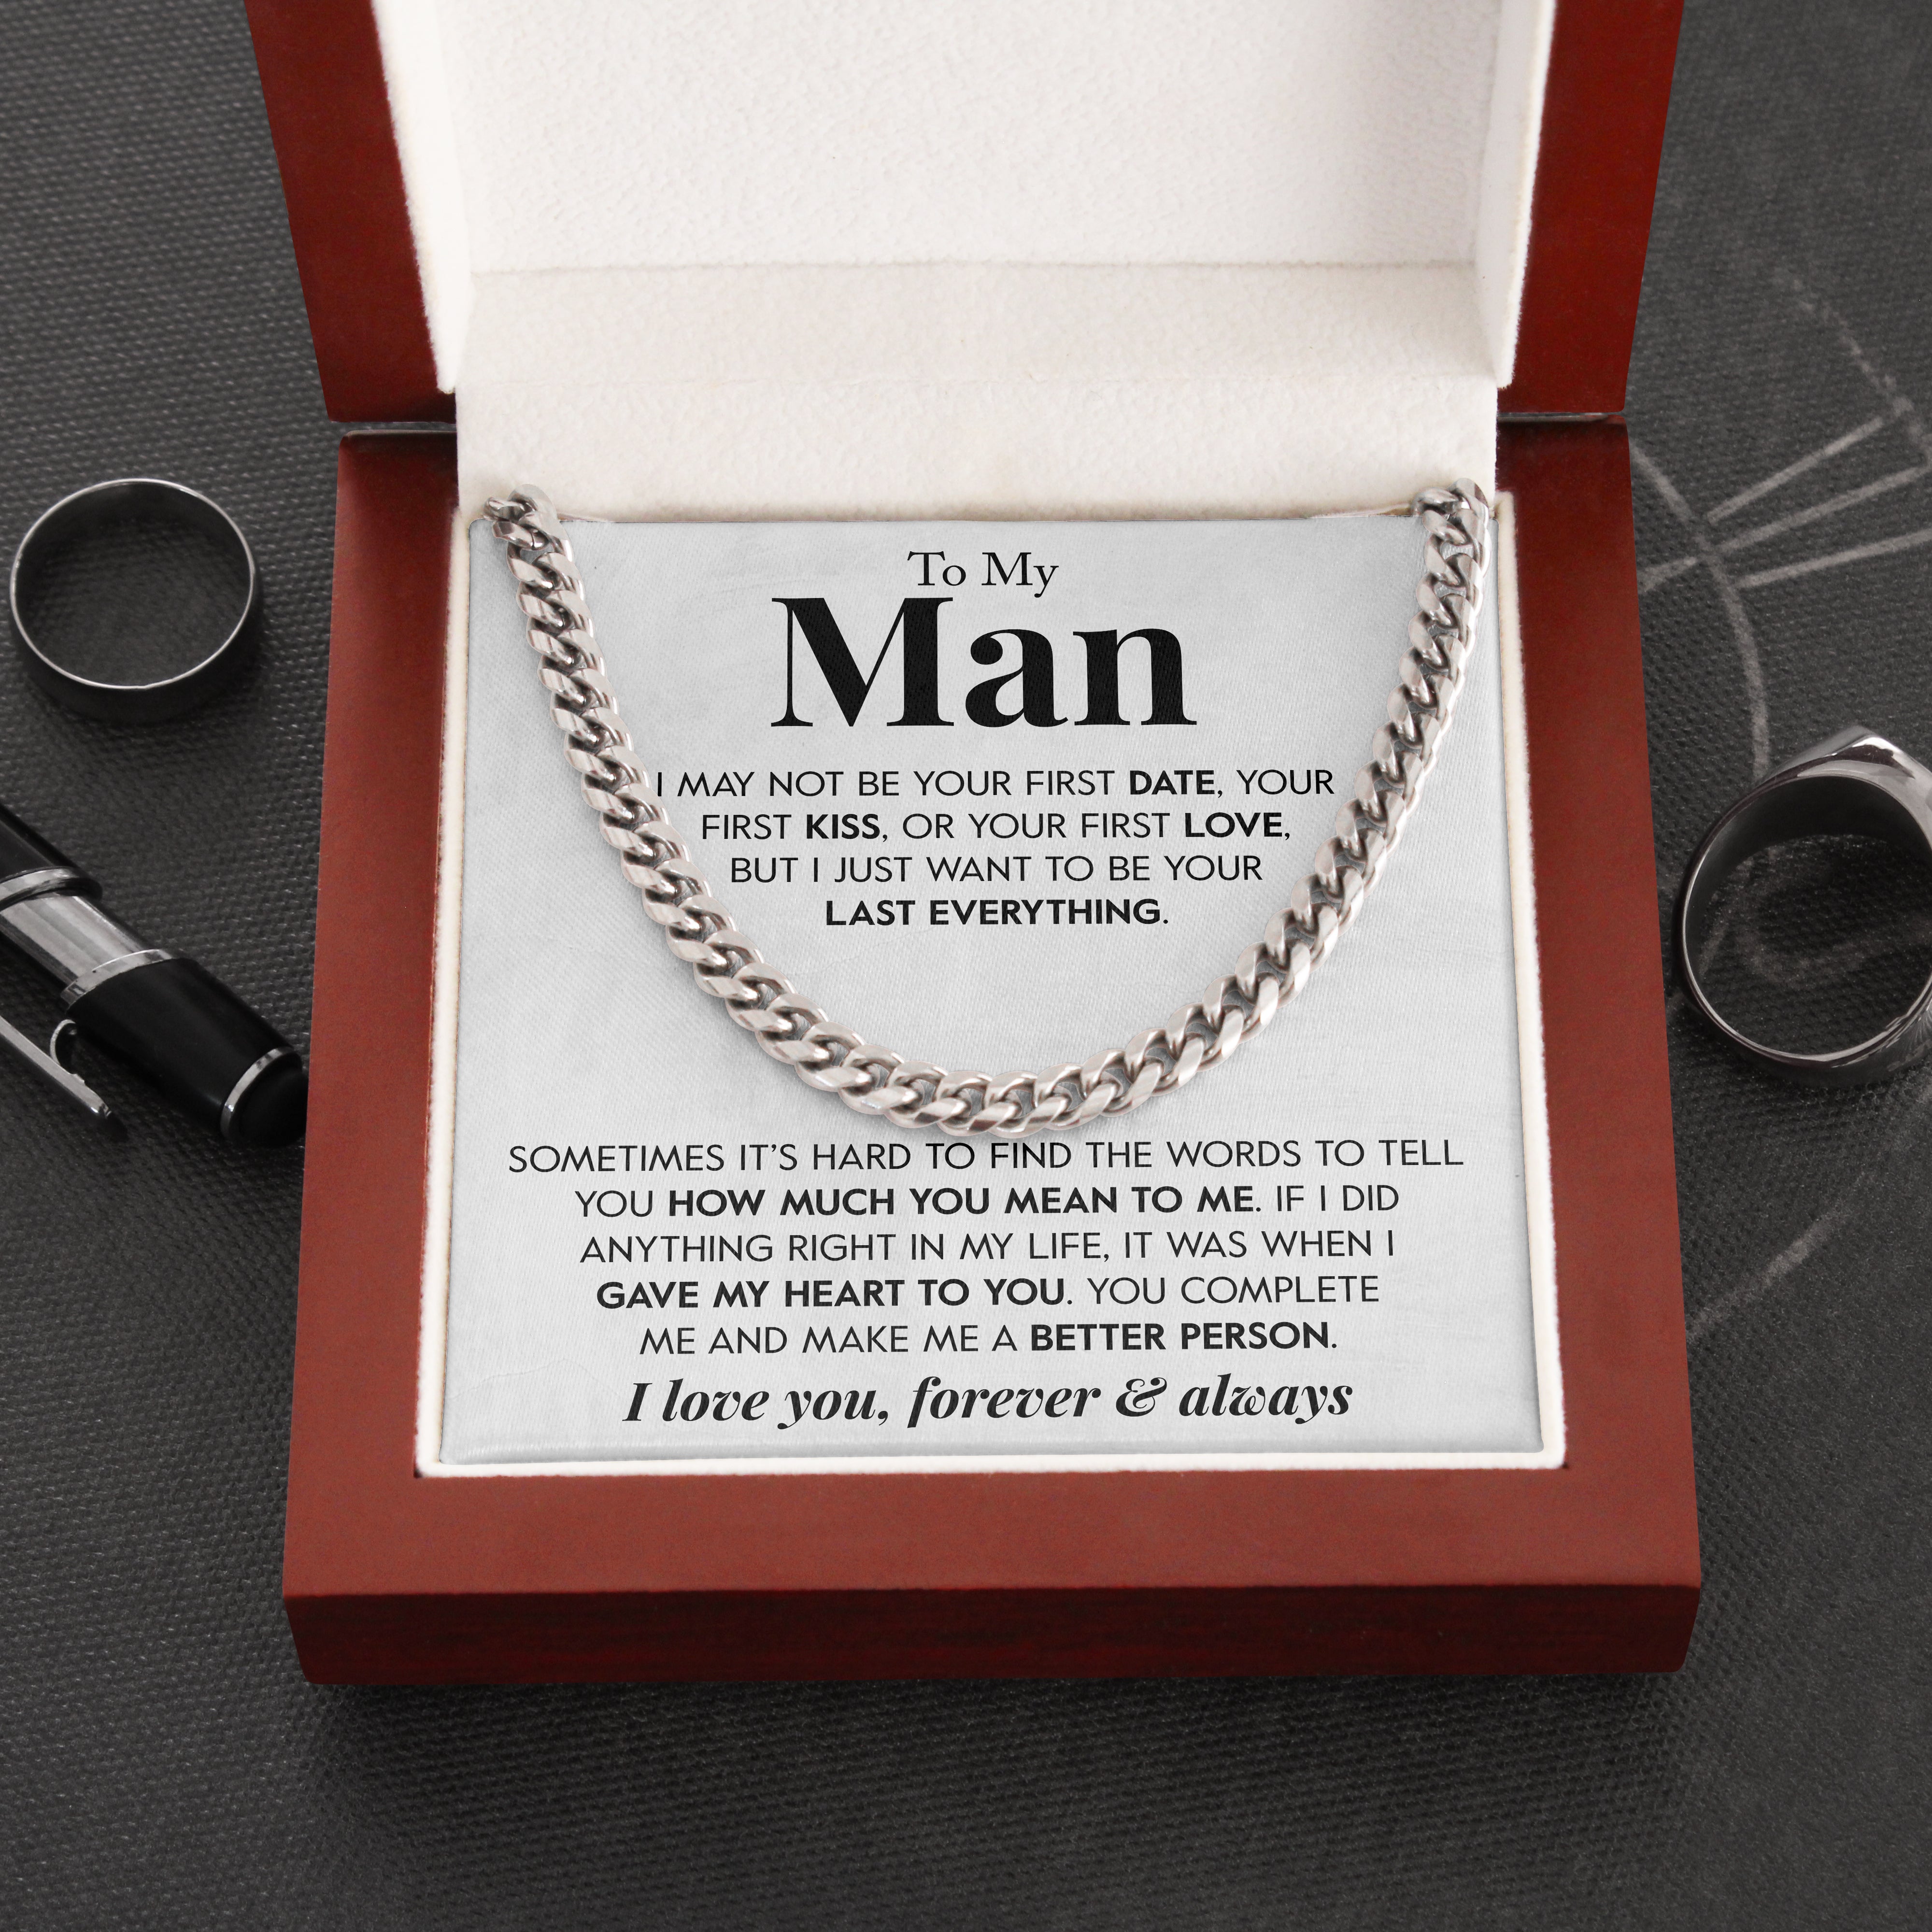 To My Man | "Last Everything" | Cuban Chain Link